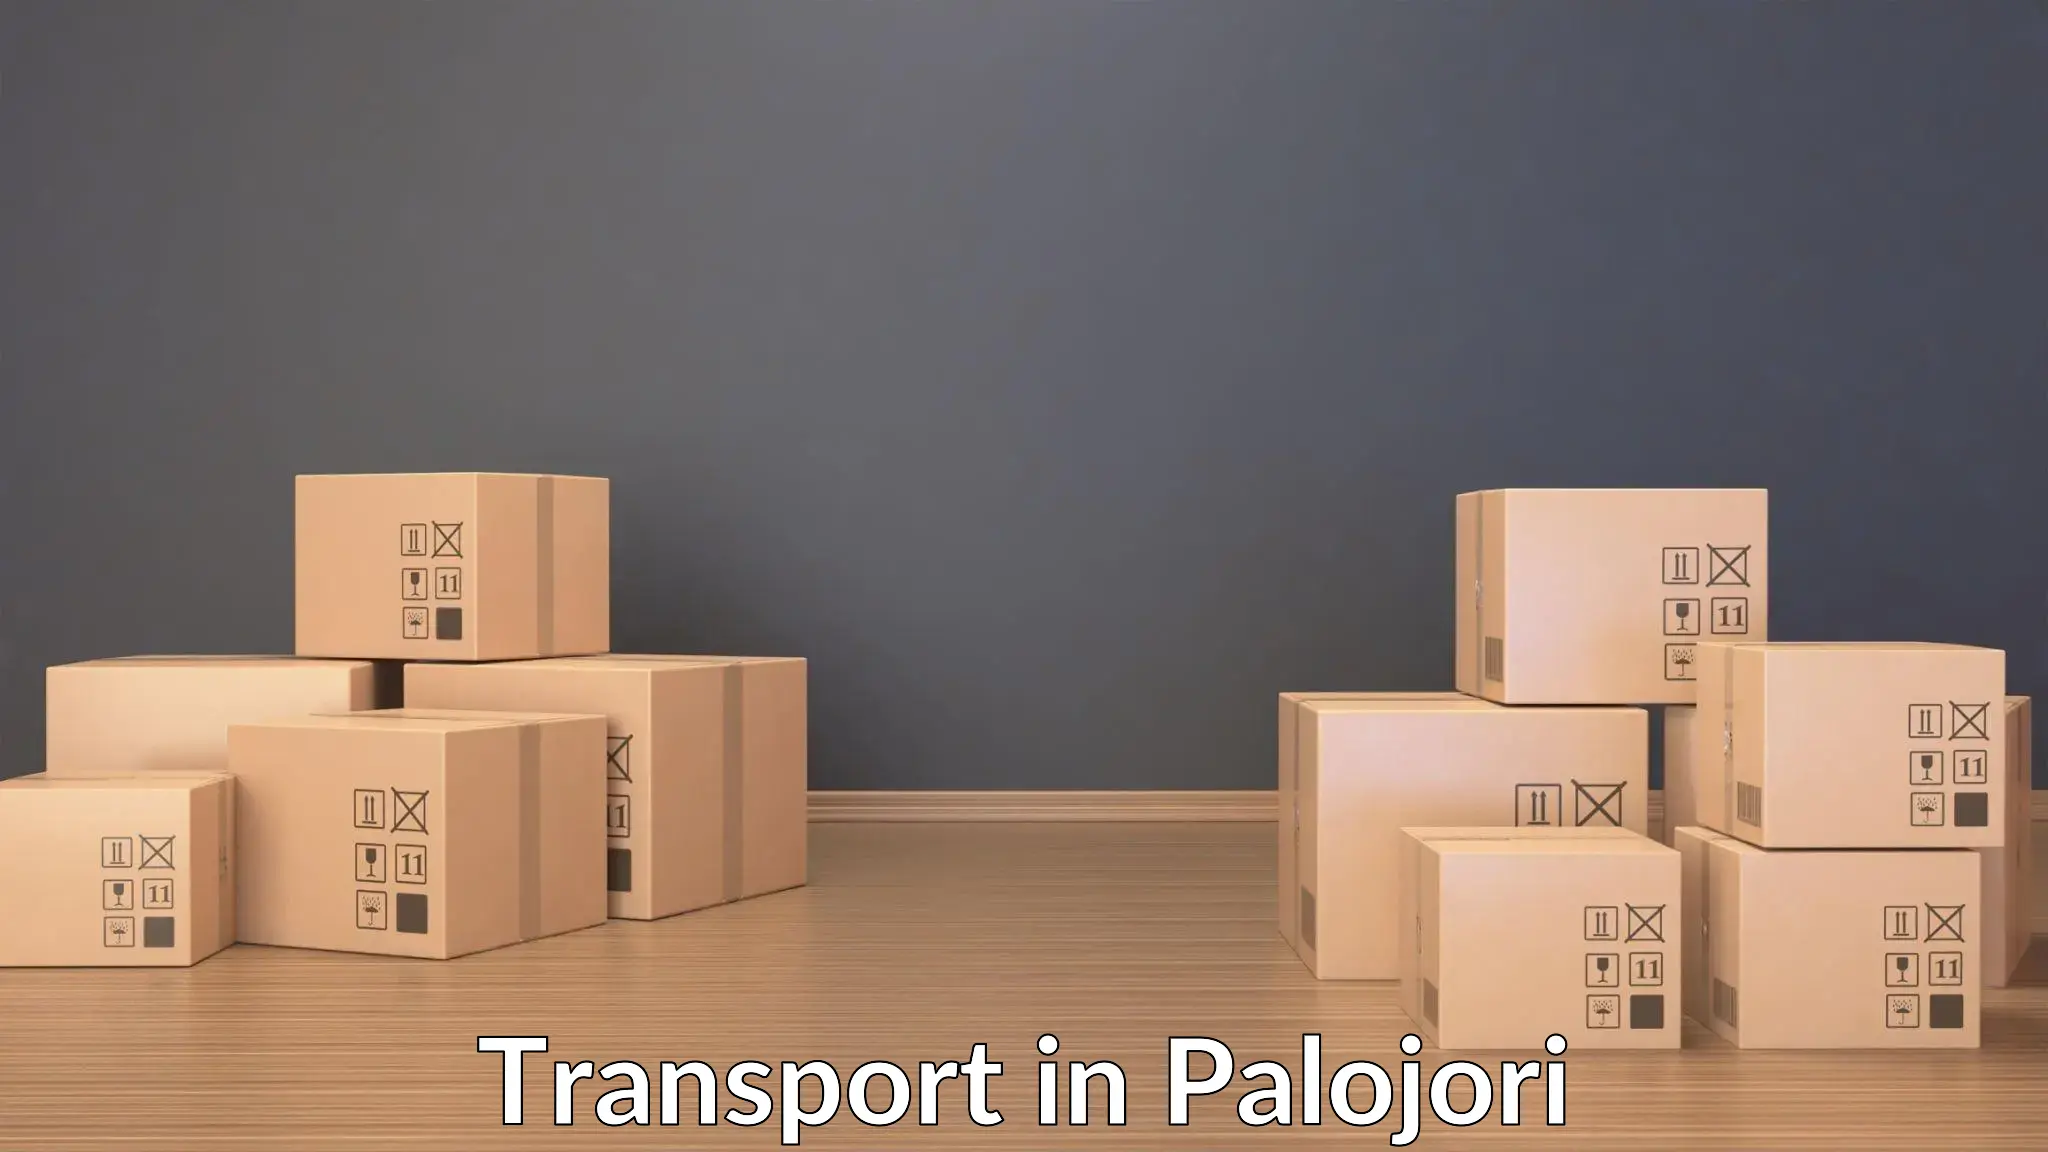 Transport bike from one state to another in Palojori